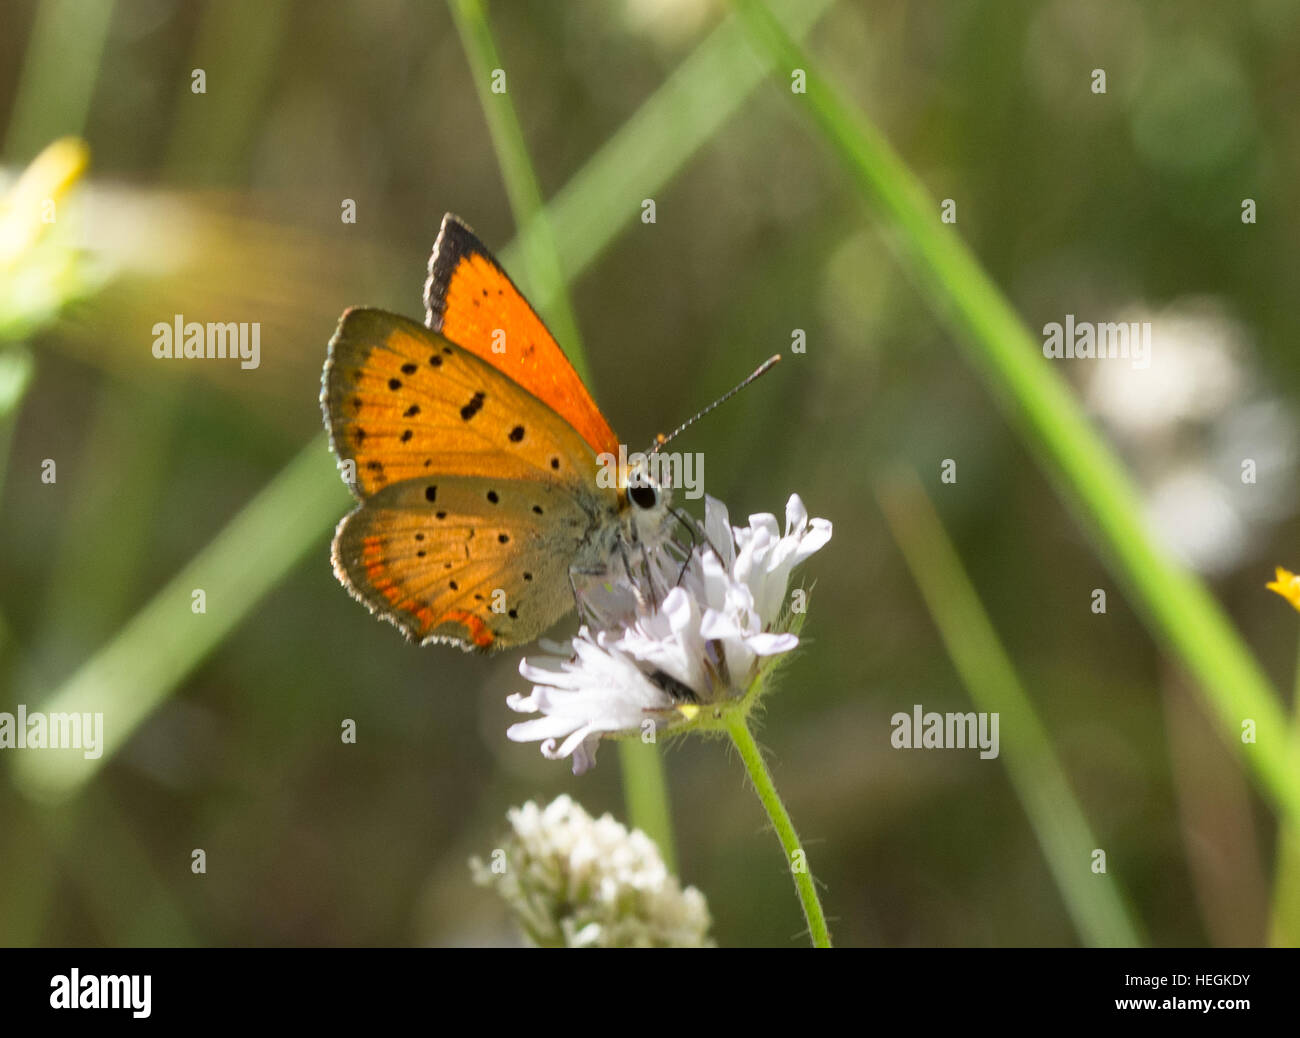 Grecian copper butterfly (Lycaena ottomana) nectaring on white flower Stock Photo